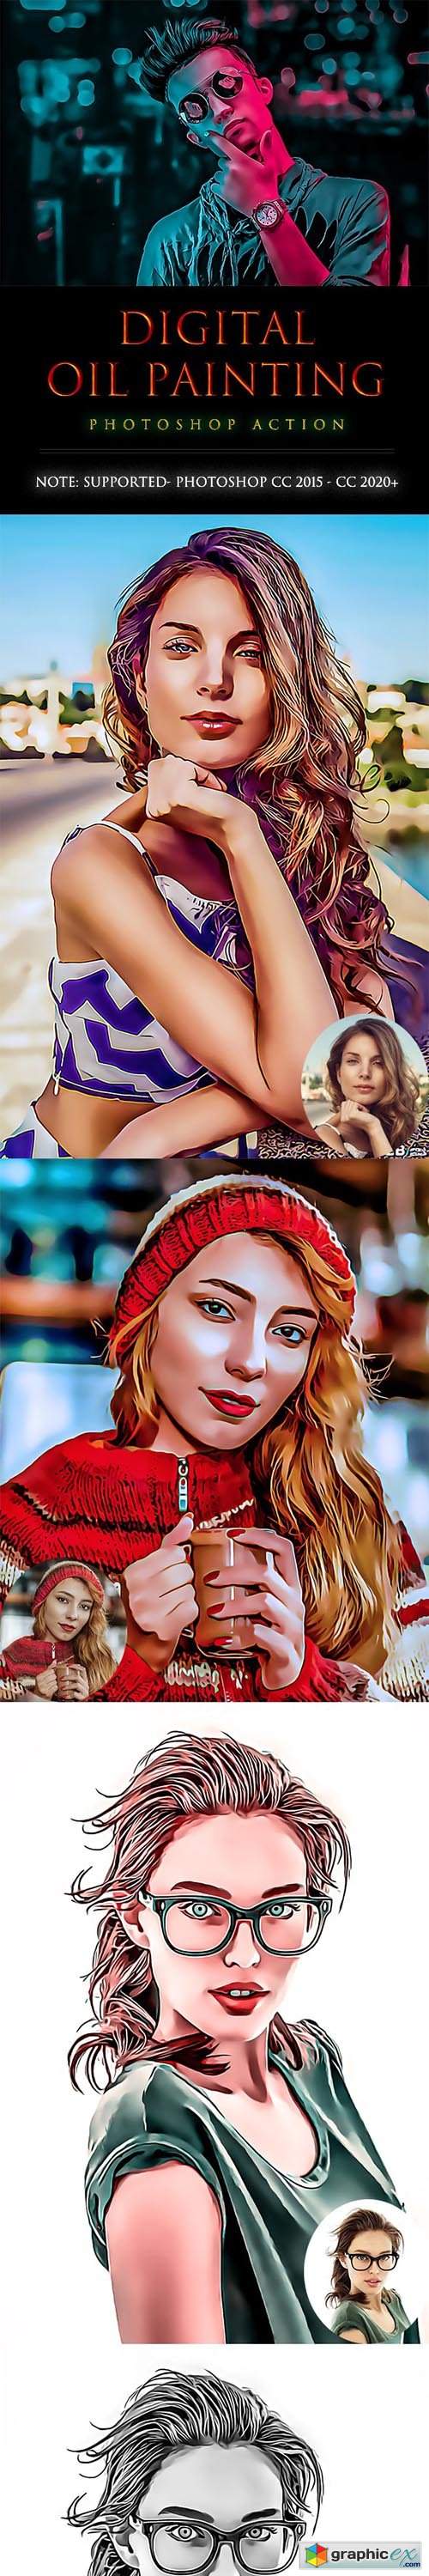 Digital OiL painting PhotoShop Action » Free Download Vector Stock